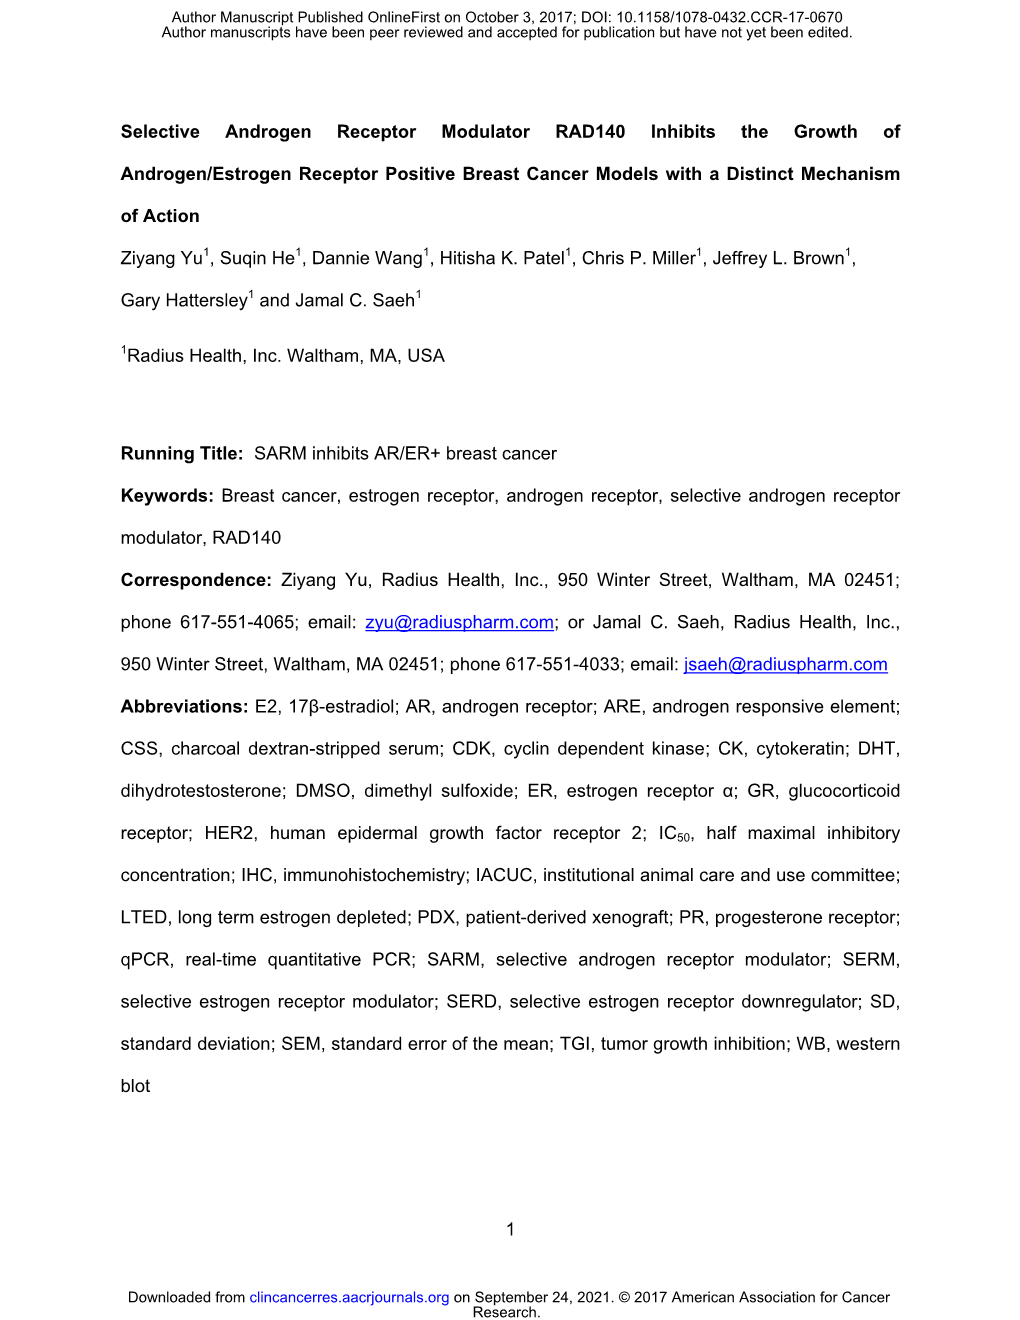 Selective Androgen Receptor Modulator RAD140 Inhibits the Growth Of